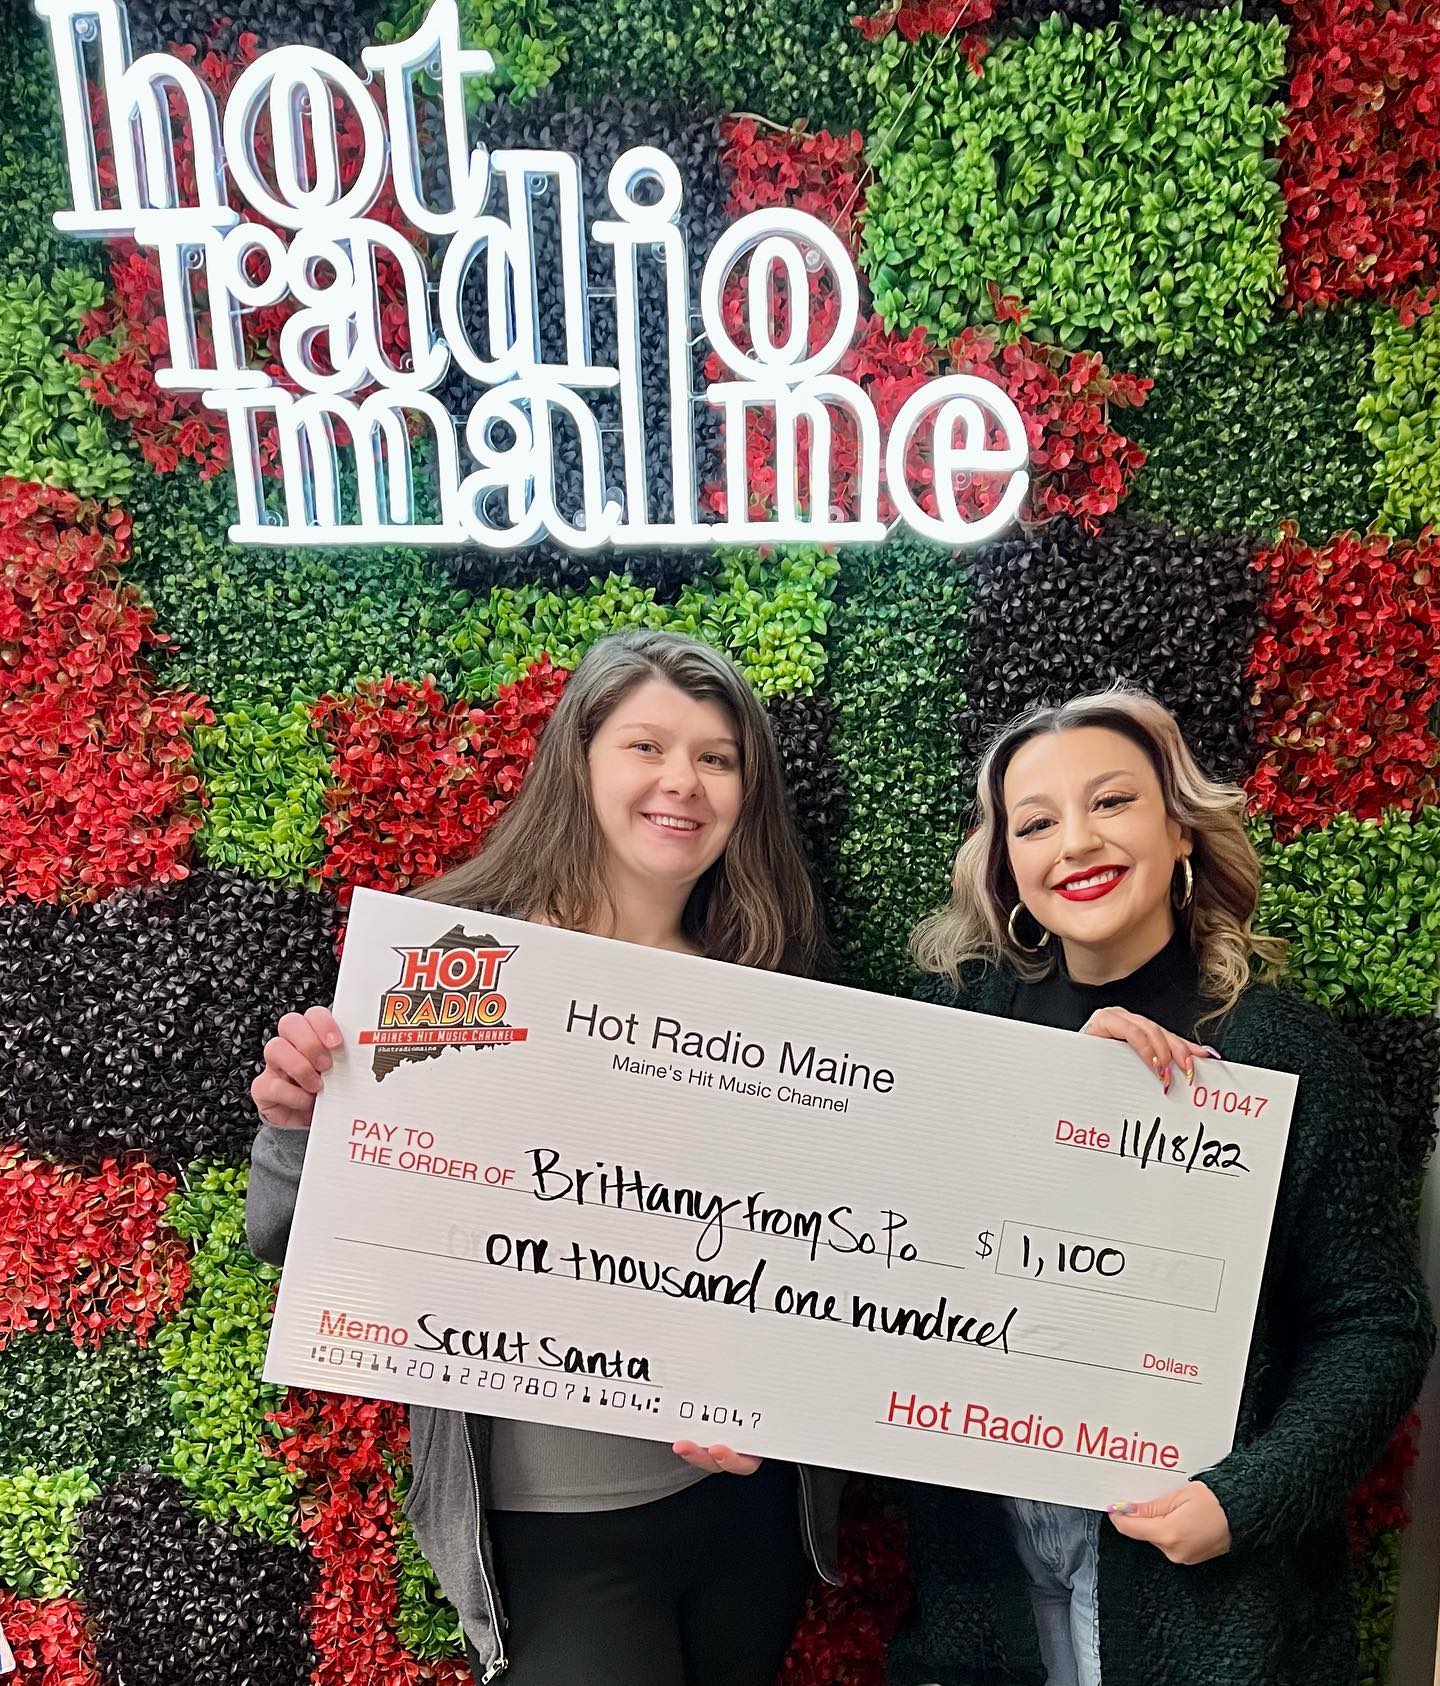 Shout out to Brittany from SoPo - she won $1,100 from Secret Santa🎅 Next chance to play for $200 is coming up at at 5pm 💰 giveaway is made Hot in Maine by @partnersbankonline